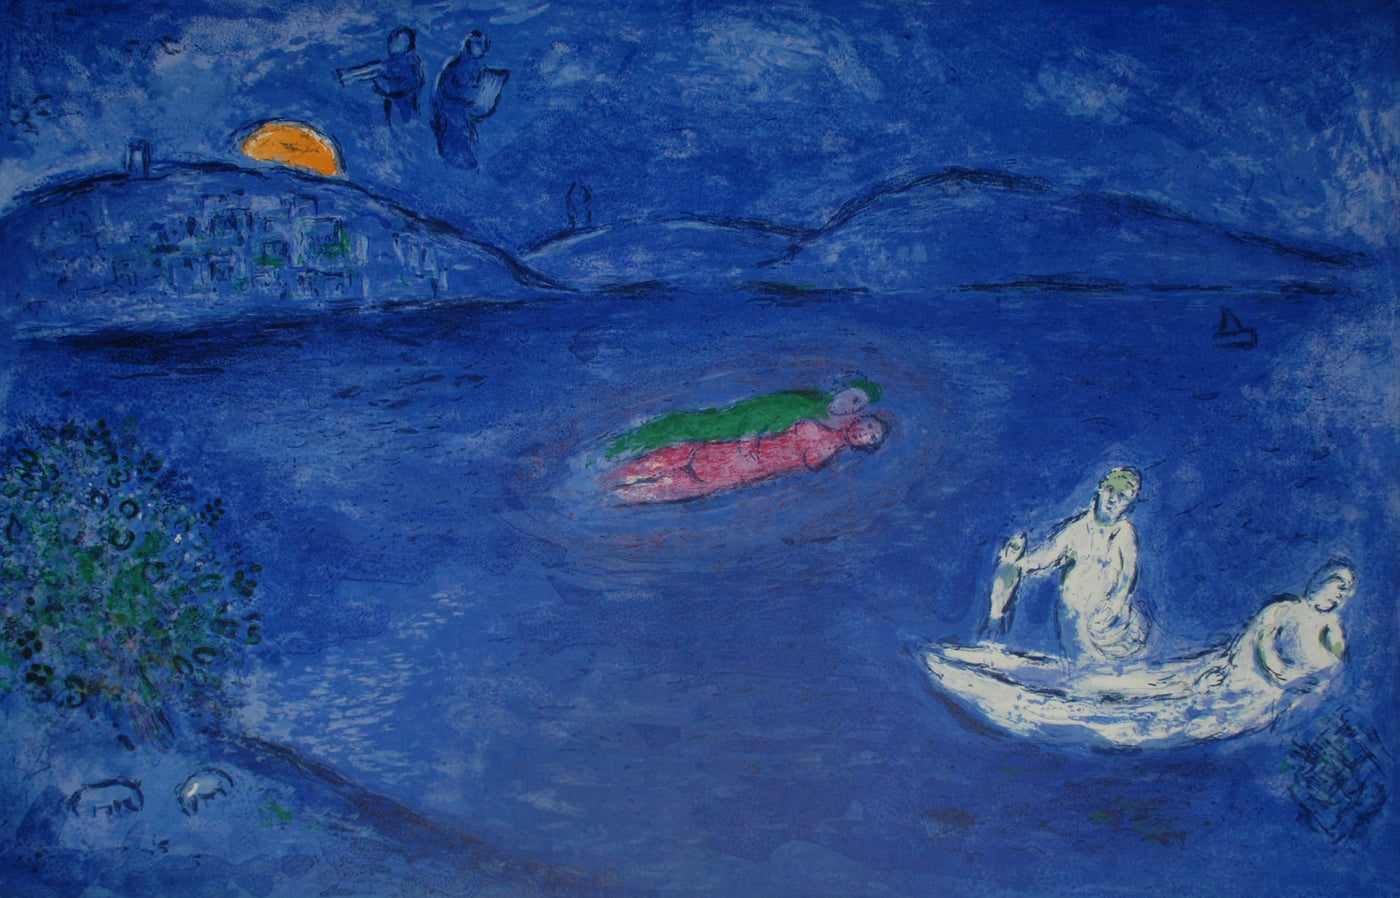 Marc Chagall Echo, from Daphnis and Chloe (Mourlot 340, Cramer 46) 1961